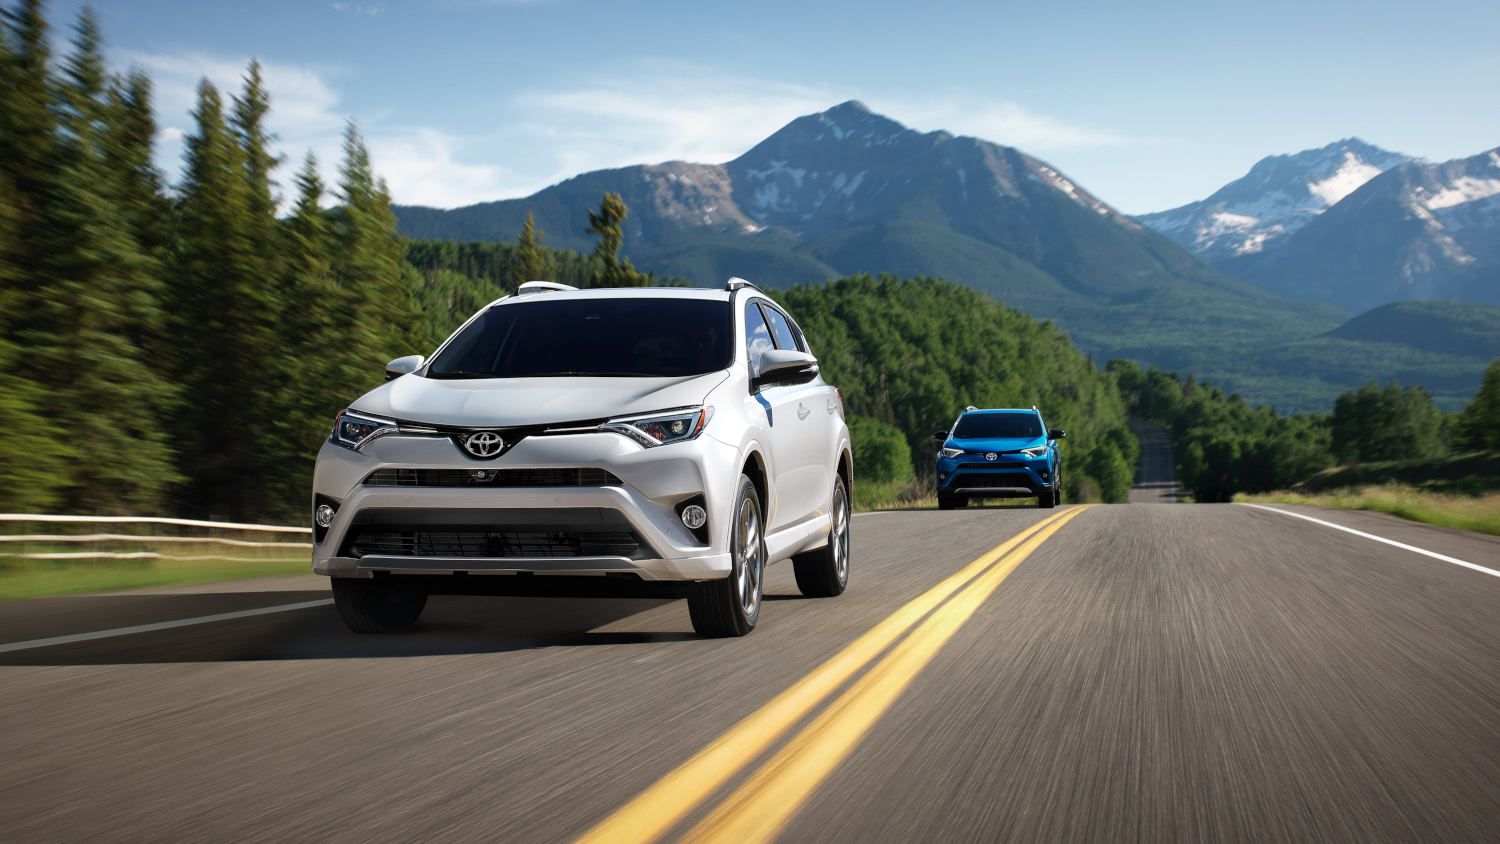 One of the best used SUVs is this Toyota RAV4